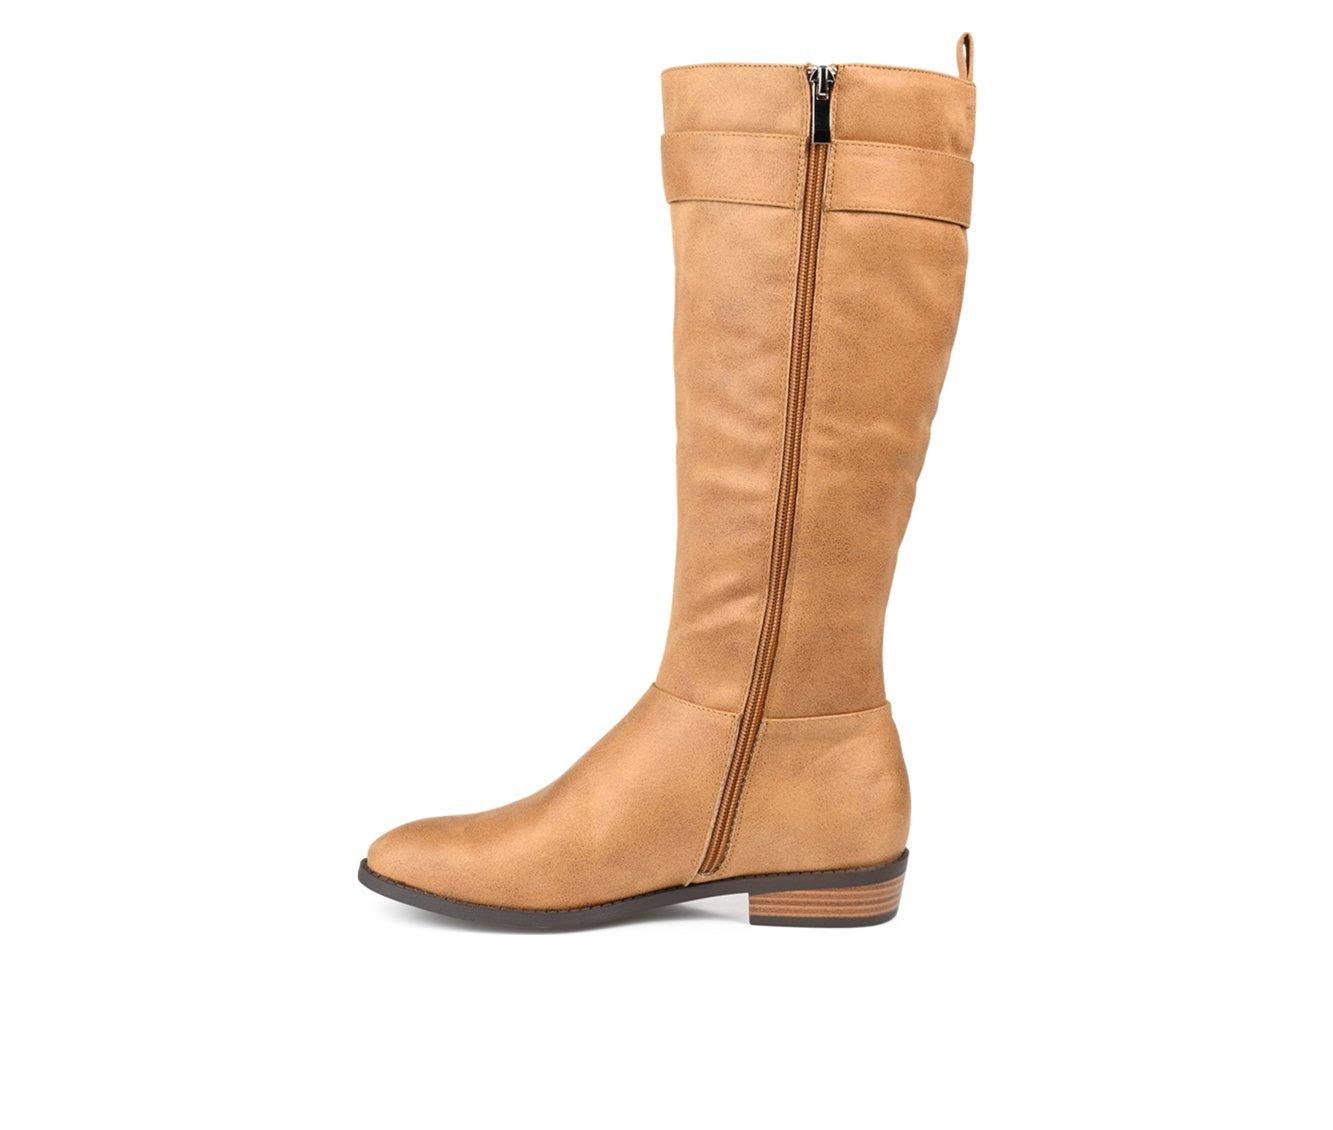 Women's Journee Collection Lelanni Knee High Boots